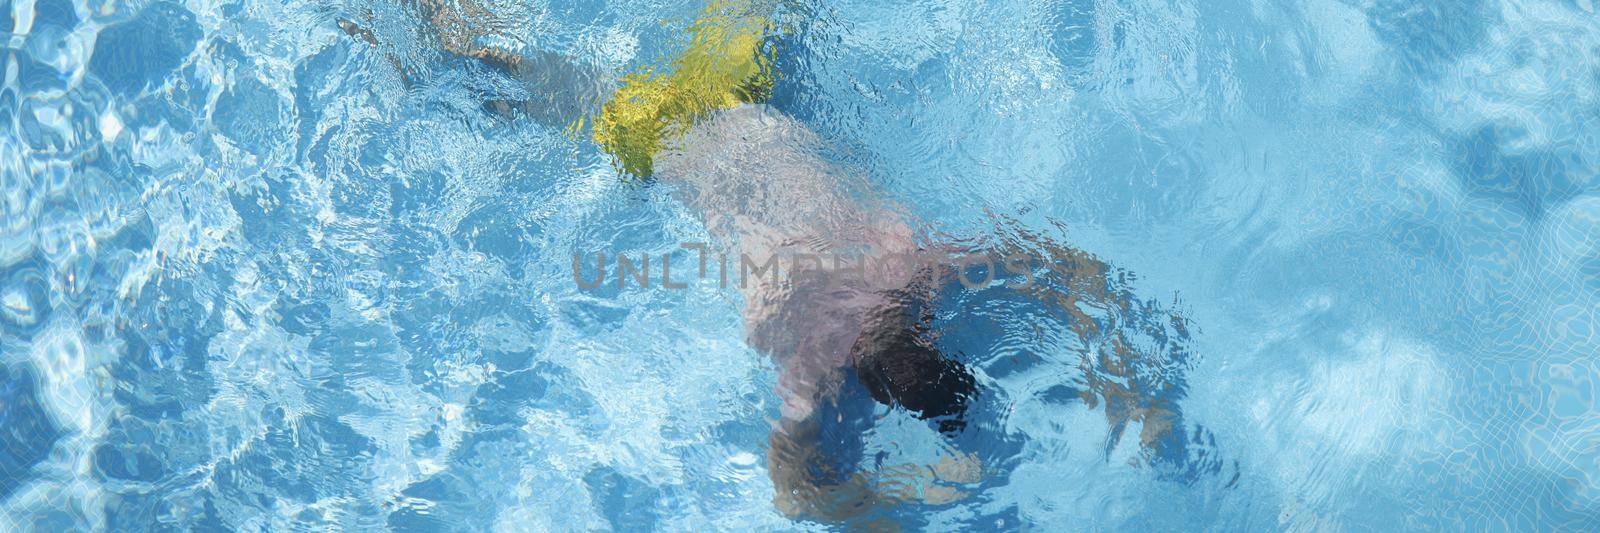 Man lying at bottom of swimming pool top view by kuprevich